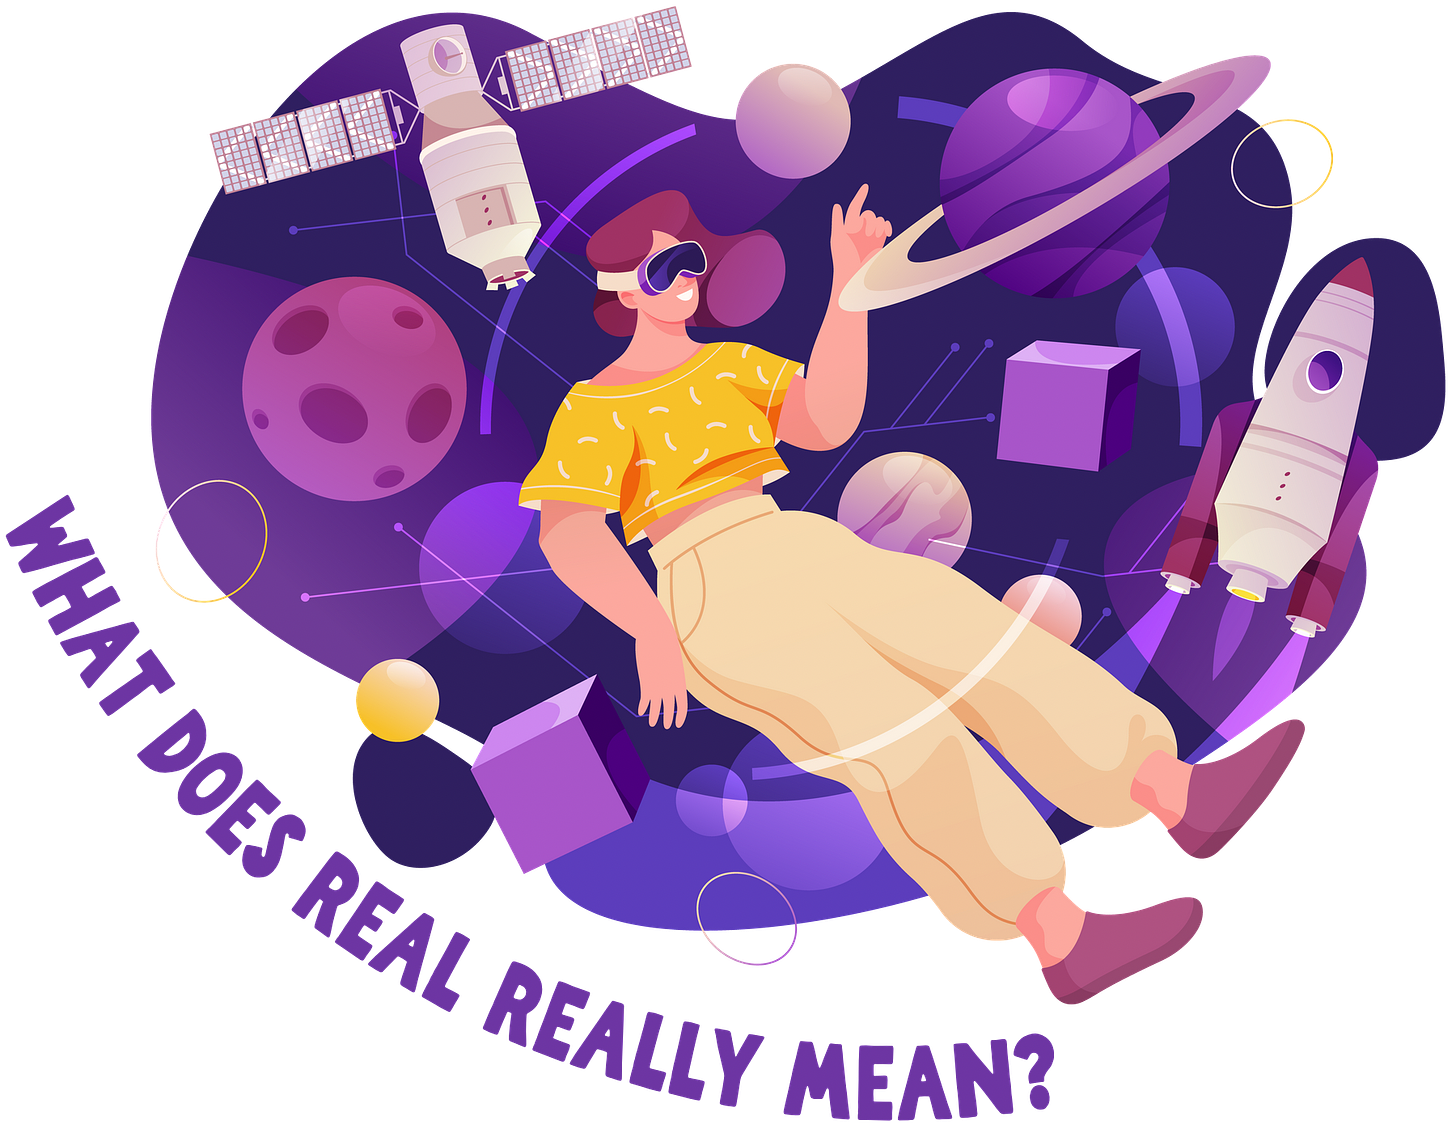 A cartoon of a light skinned person with maroon hair wearing a yellow tee shirt, baggy beige pants, maroon shoes, and dark purple virtual reality glasses. They appear to be floating in front of an abstract space-themed background illustrated in shades of purple that features planets, moons, and a satellite. Under the drawing, large purple text reads “WHAT DOES REAL REALLY MEAN?”